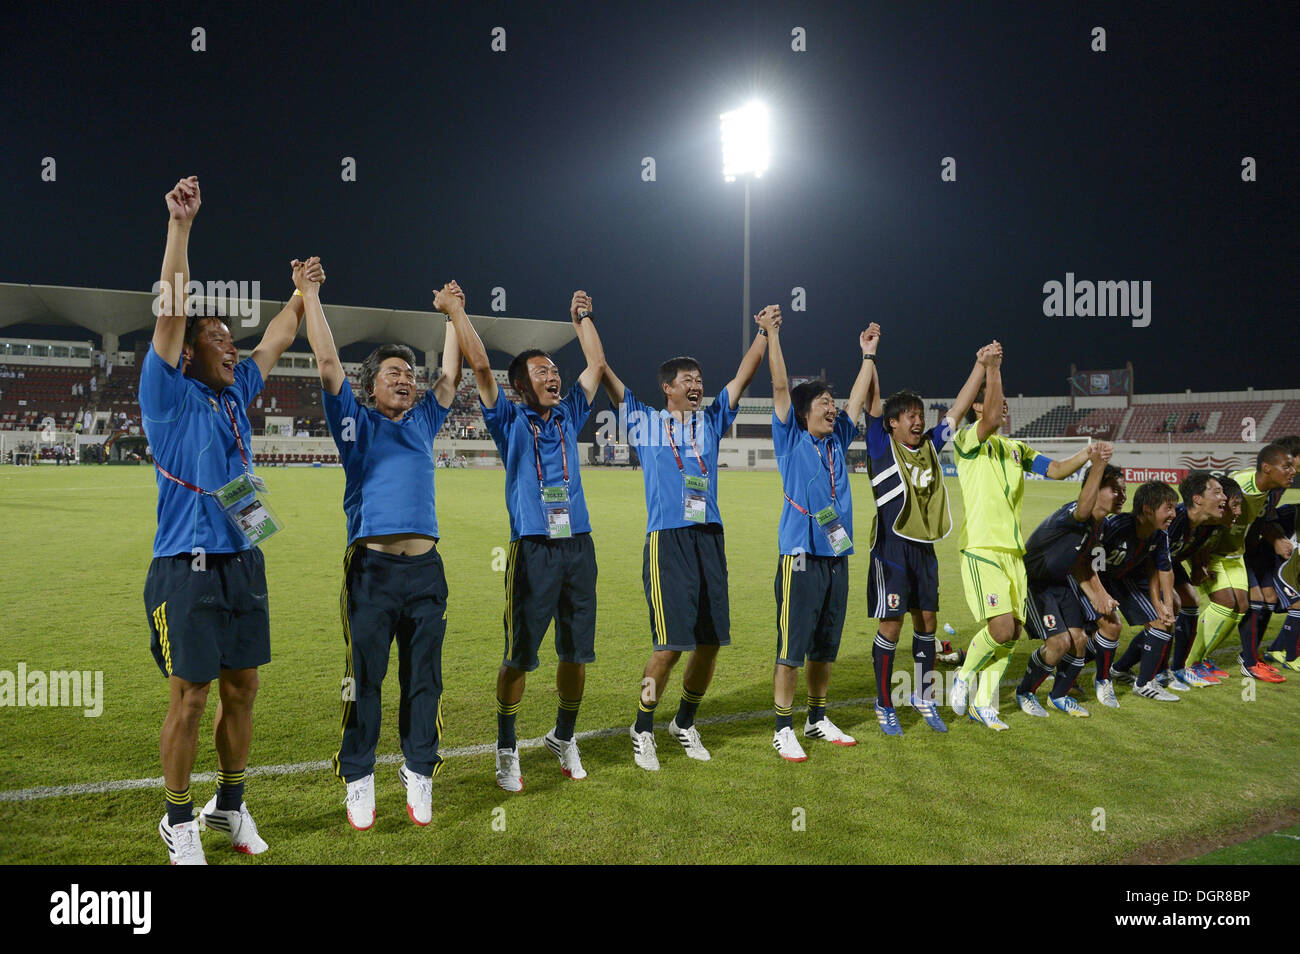 Sharjah, United Arab Emirates. 24th Oct, 2013. Japan team group (JPN) Football / Soccer : Players and staffs of Japan celebrate their upset winning after the FIFA U-17 World Cup UAE 2013 Group D match between Japan 2-1 Tunisia at Sharjah Stadium in Sharjah, United Arab Emirates . © FAR EAST PRESS/AFLO/Alamy Live News Stock Photo